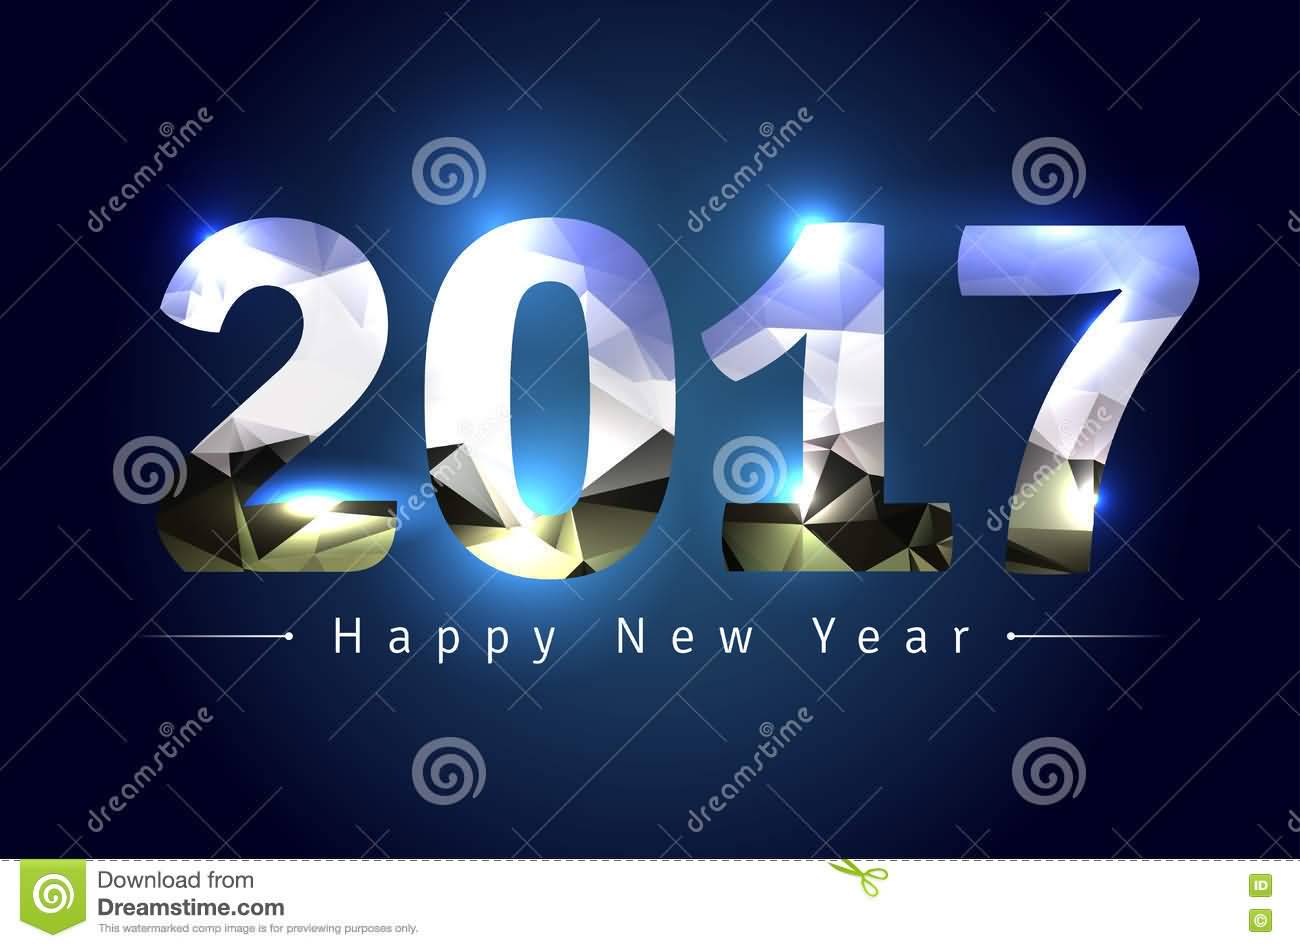 60 Most Beautiful New Year 2017 Wish Pictures